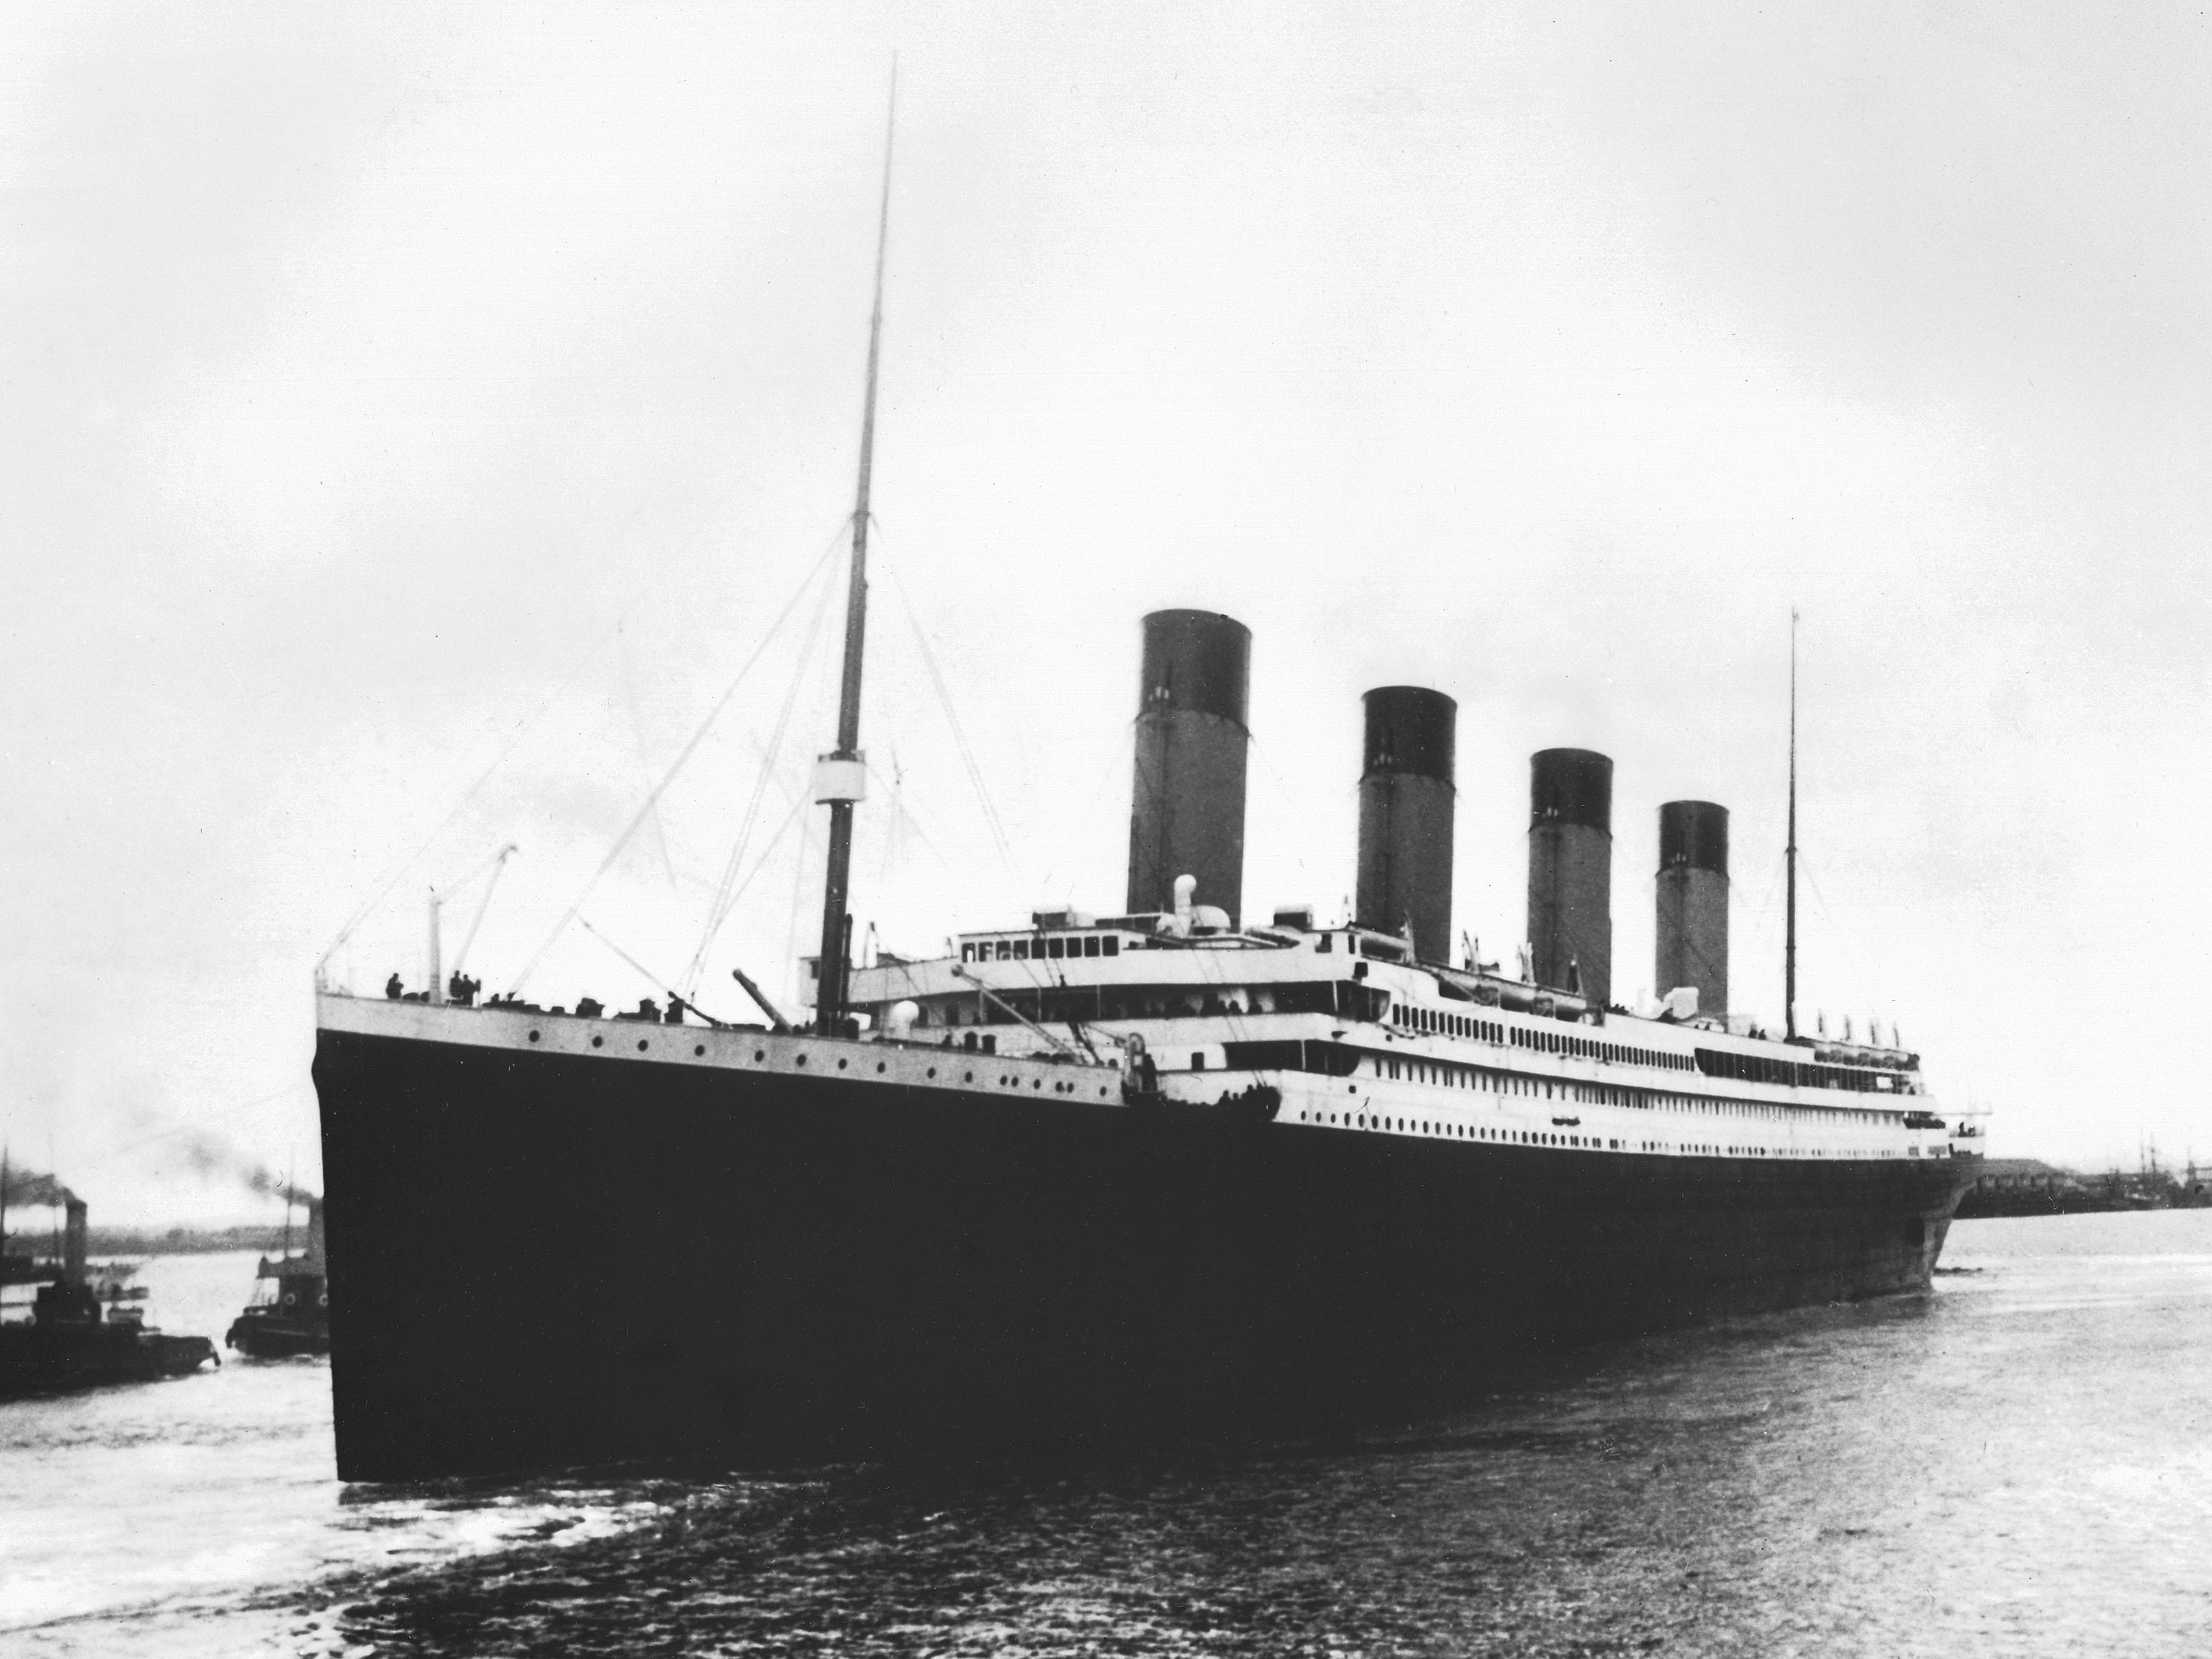 <p>A <a href="https://www.britannica.com/topic/Titanic">British passenger liner</a>, the Titanic was operated by White Star Line and was traveling from Southampton, England, to New York City. </p>